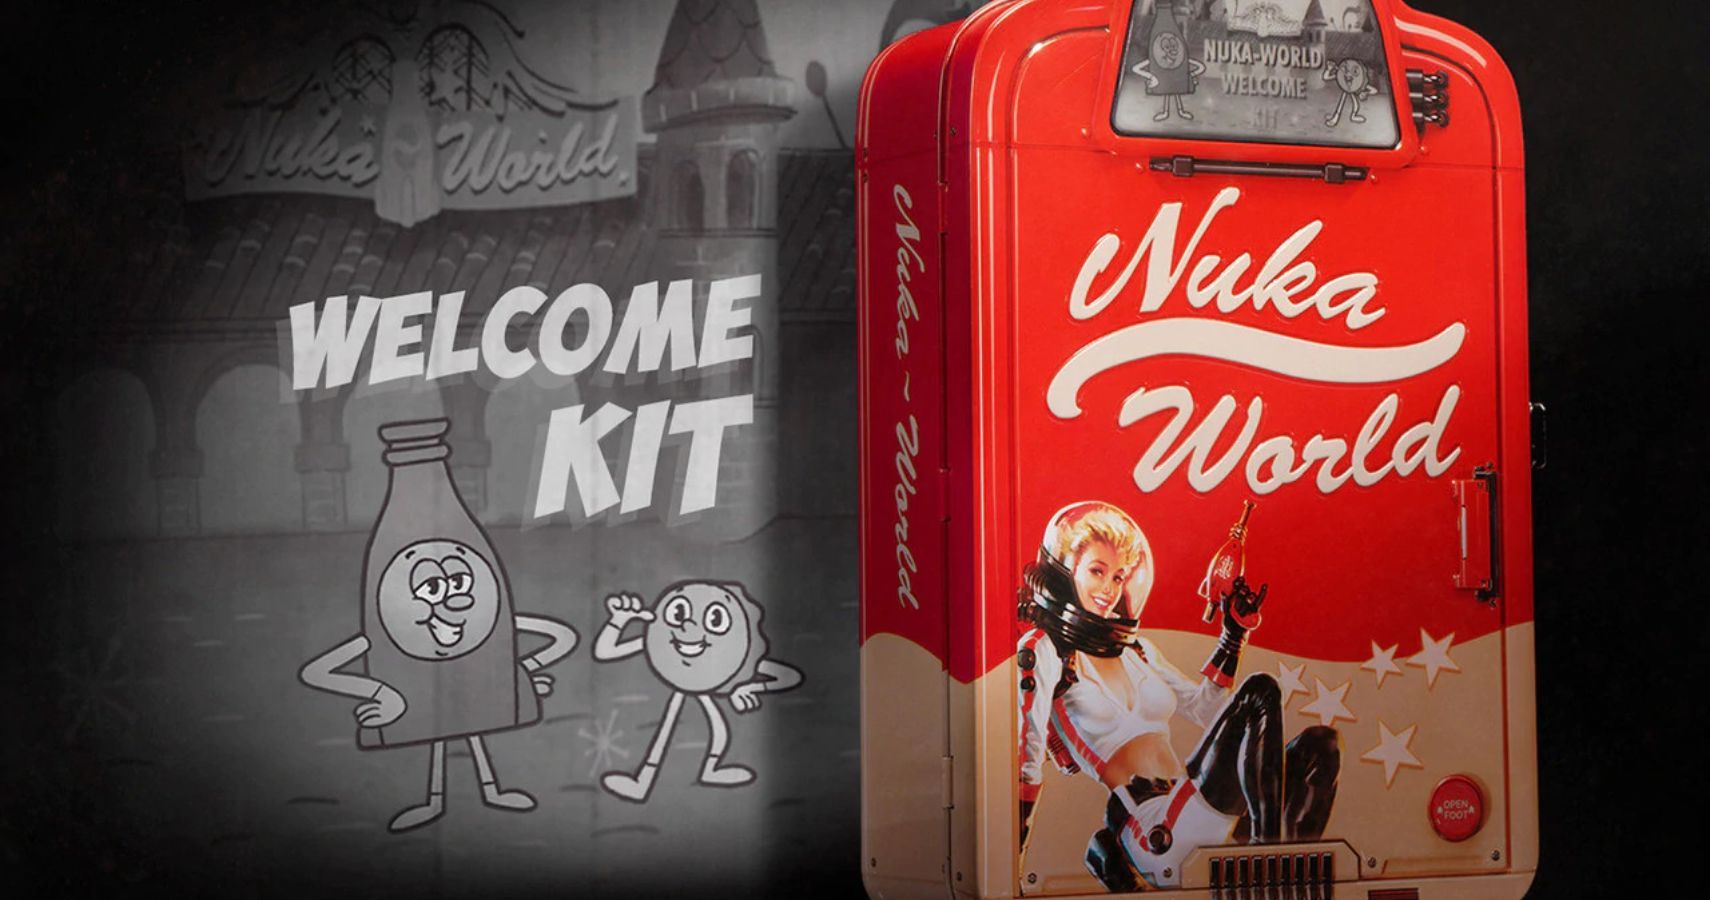 Check Out This NukaWorld Welcome Kit From Doctor Collector